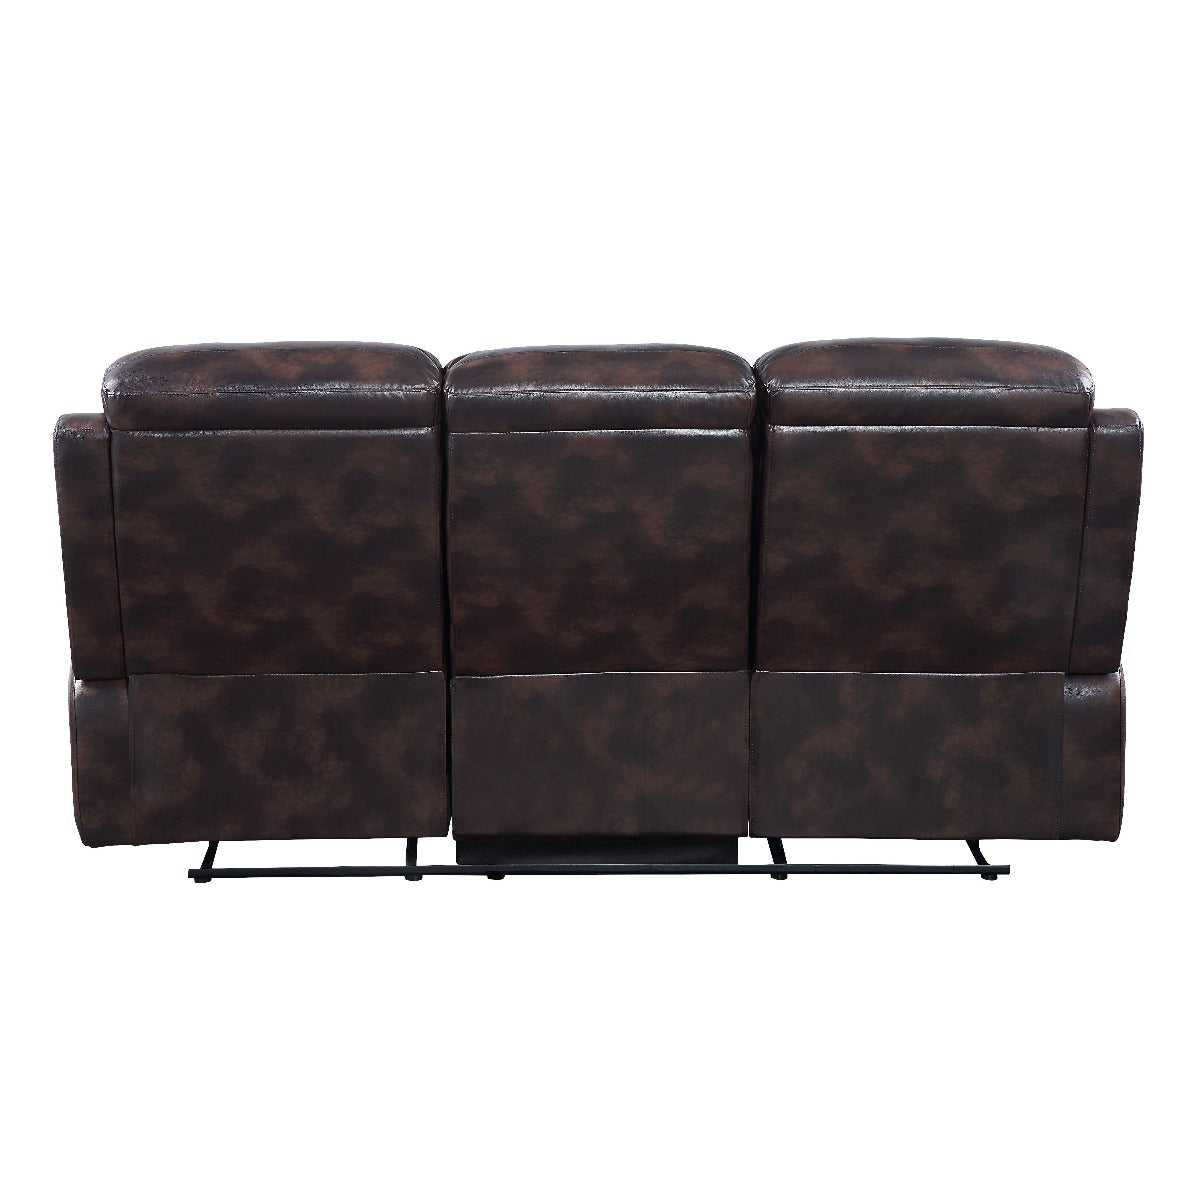 Perfiel Two-Tone Top Grain Leather Sofa Collection